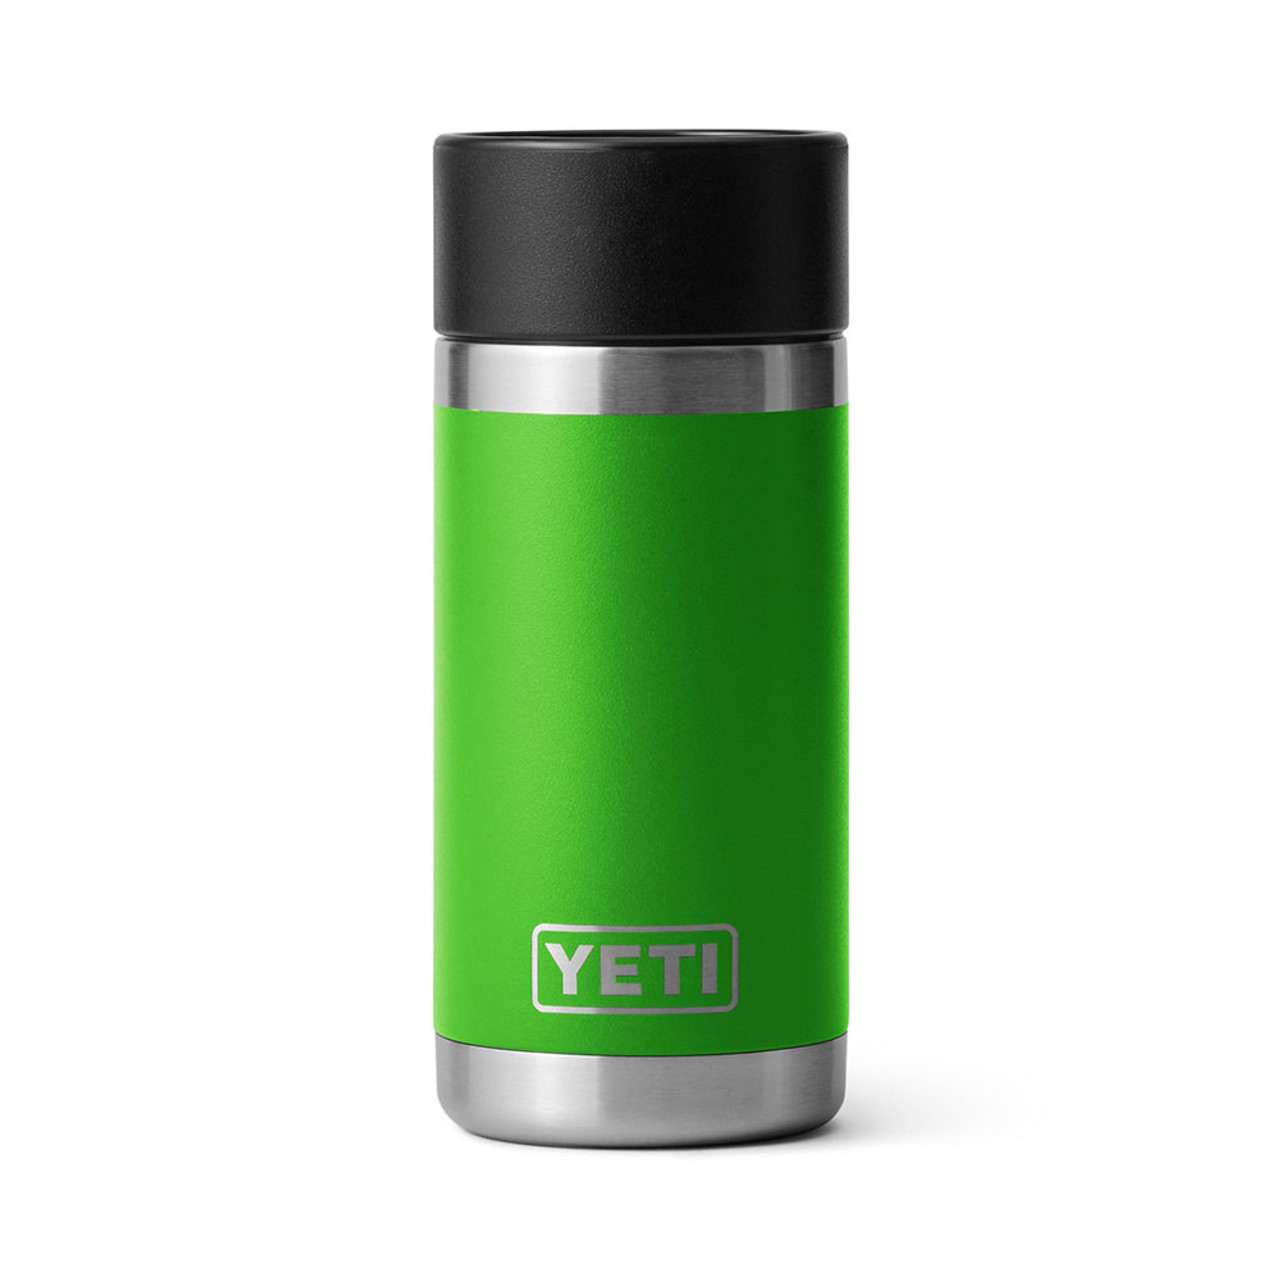 The Camp Green collection from @yeti is now available in a variety of  drinkware and hard and soft coolers.